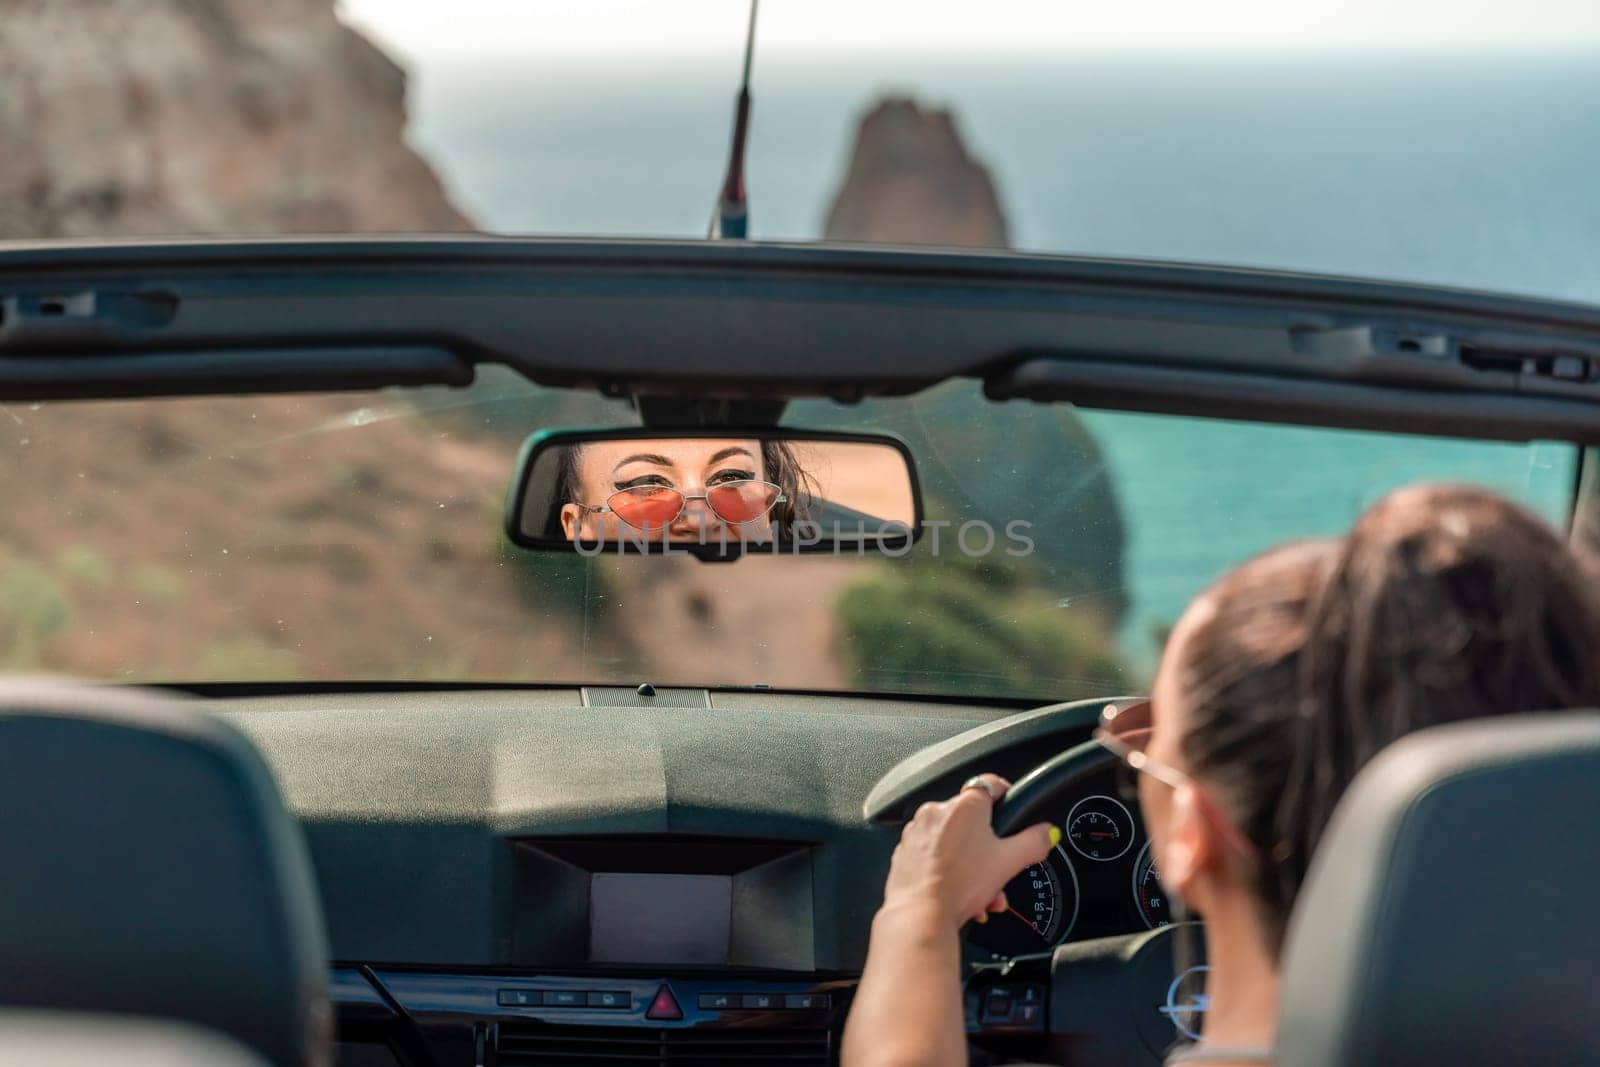 A woman is driving a convertible car with the top down, enjoying the ocean view. The car is red and black, and the woman is wearing a pink shirt